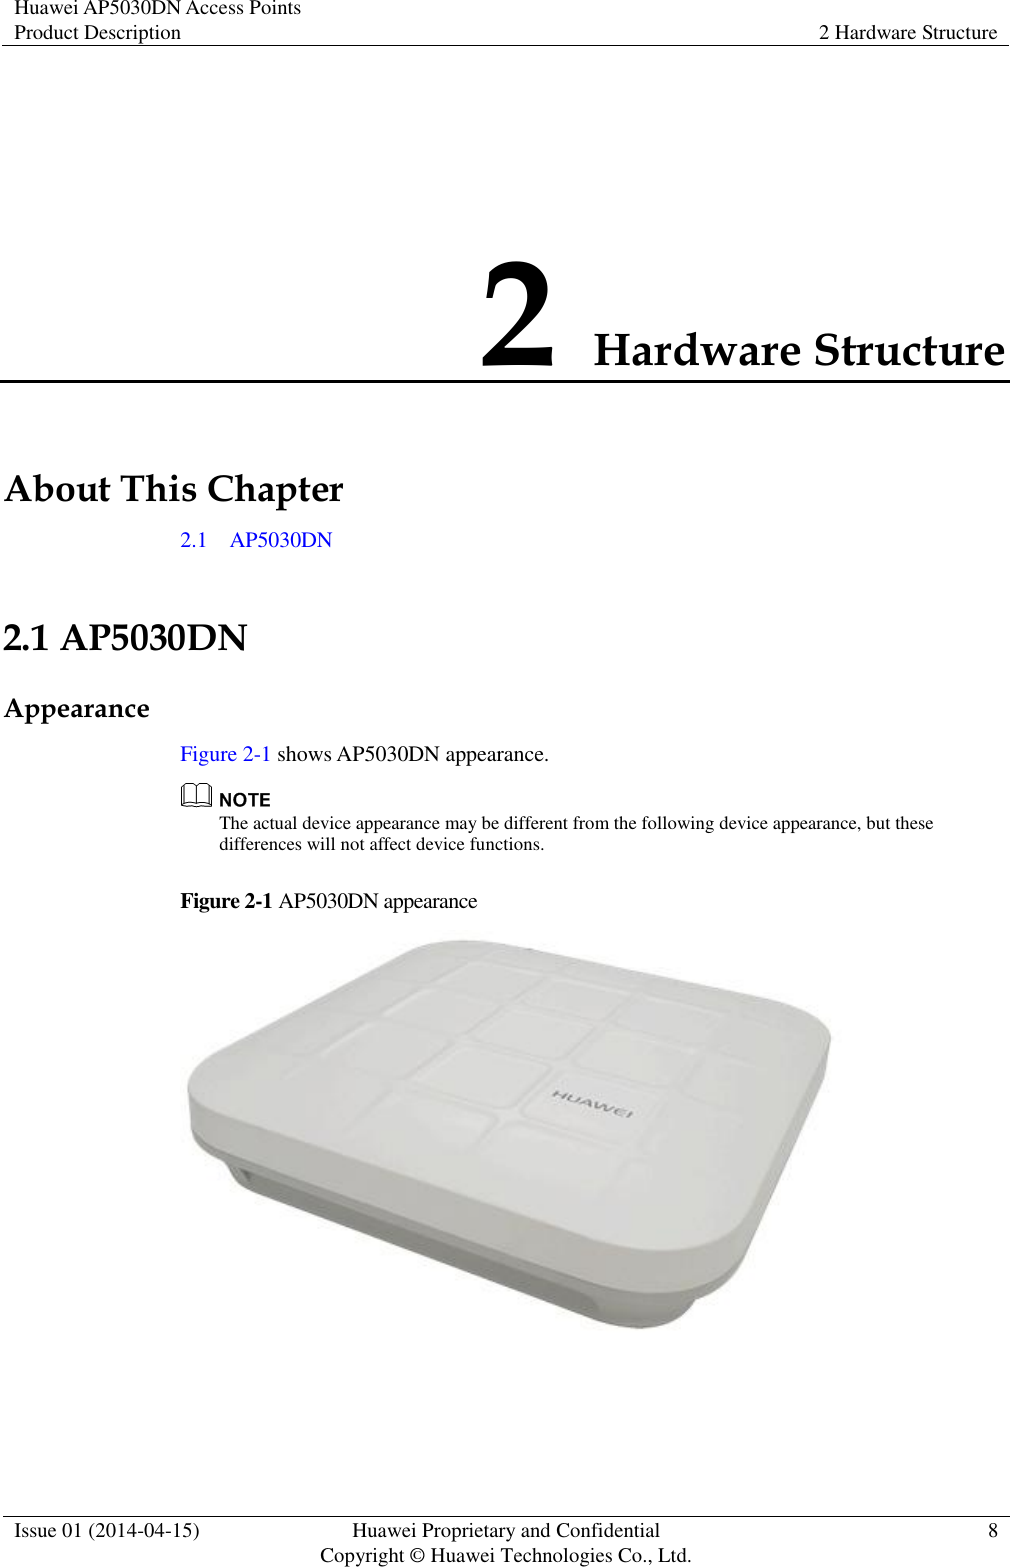 Huawei AP5030DN Access Points Product Description 2 Hardware Structure  Issue 01 (2014-04-15) Huawei Proprietary and Confidential                                     Copyright © Huawei Technologies Co., Ltd. 8  2 Hardware Structure About This Chapter 2.1    AP5030DN 2.1 AP5030DN Appearance Figure 2-1 shows AP5030DN appearance.  The actual device appearance may be different from the following device appearance, but these differences will not affect device functions. Figure 2-1 AP5030DN appearance   